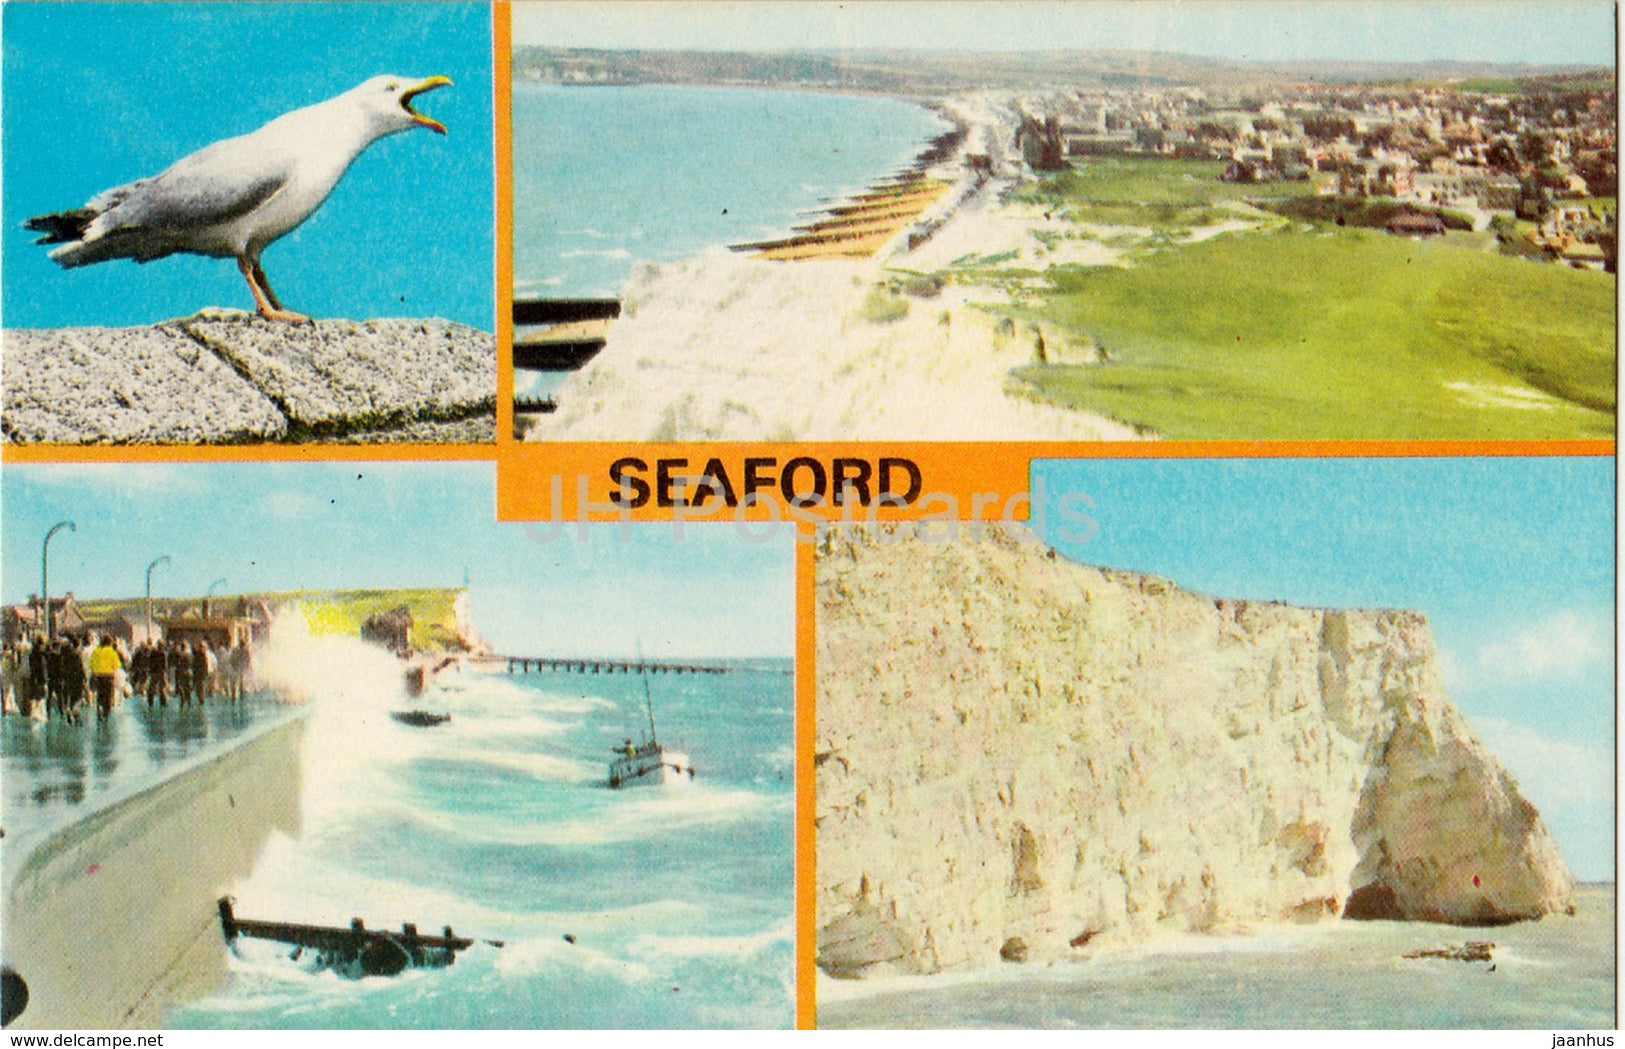 Seaford - Rough Seas - View from the Cliffs - Splash Point - Multiview  PLX3664 - 1985 - United Kingdom - England - used - JH Postcards